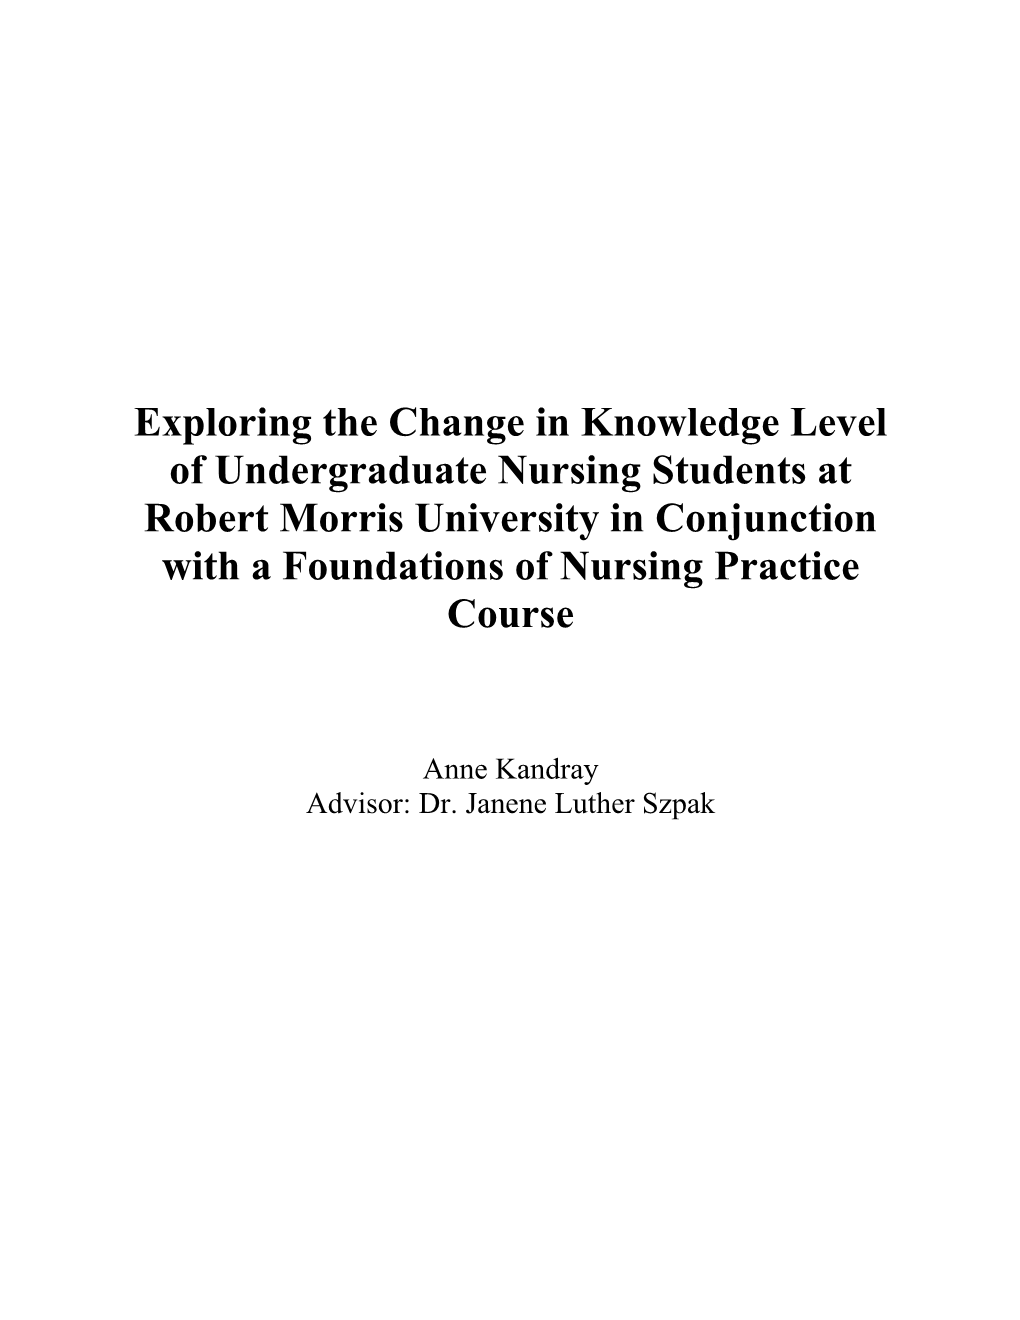 Exploring the Change in Knowledge Level of Undergraduate Nursing Students at Robert Morris University in Conjunction with a Foundations of Nursing Practice Course